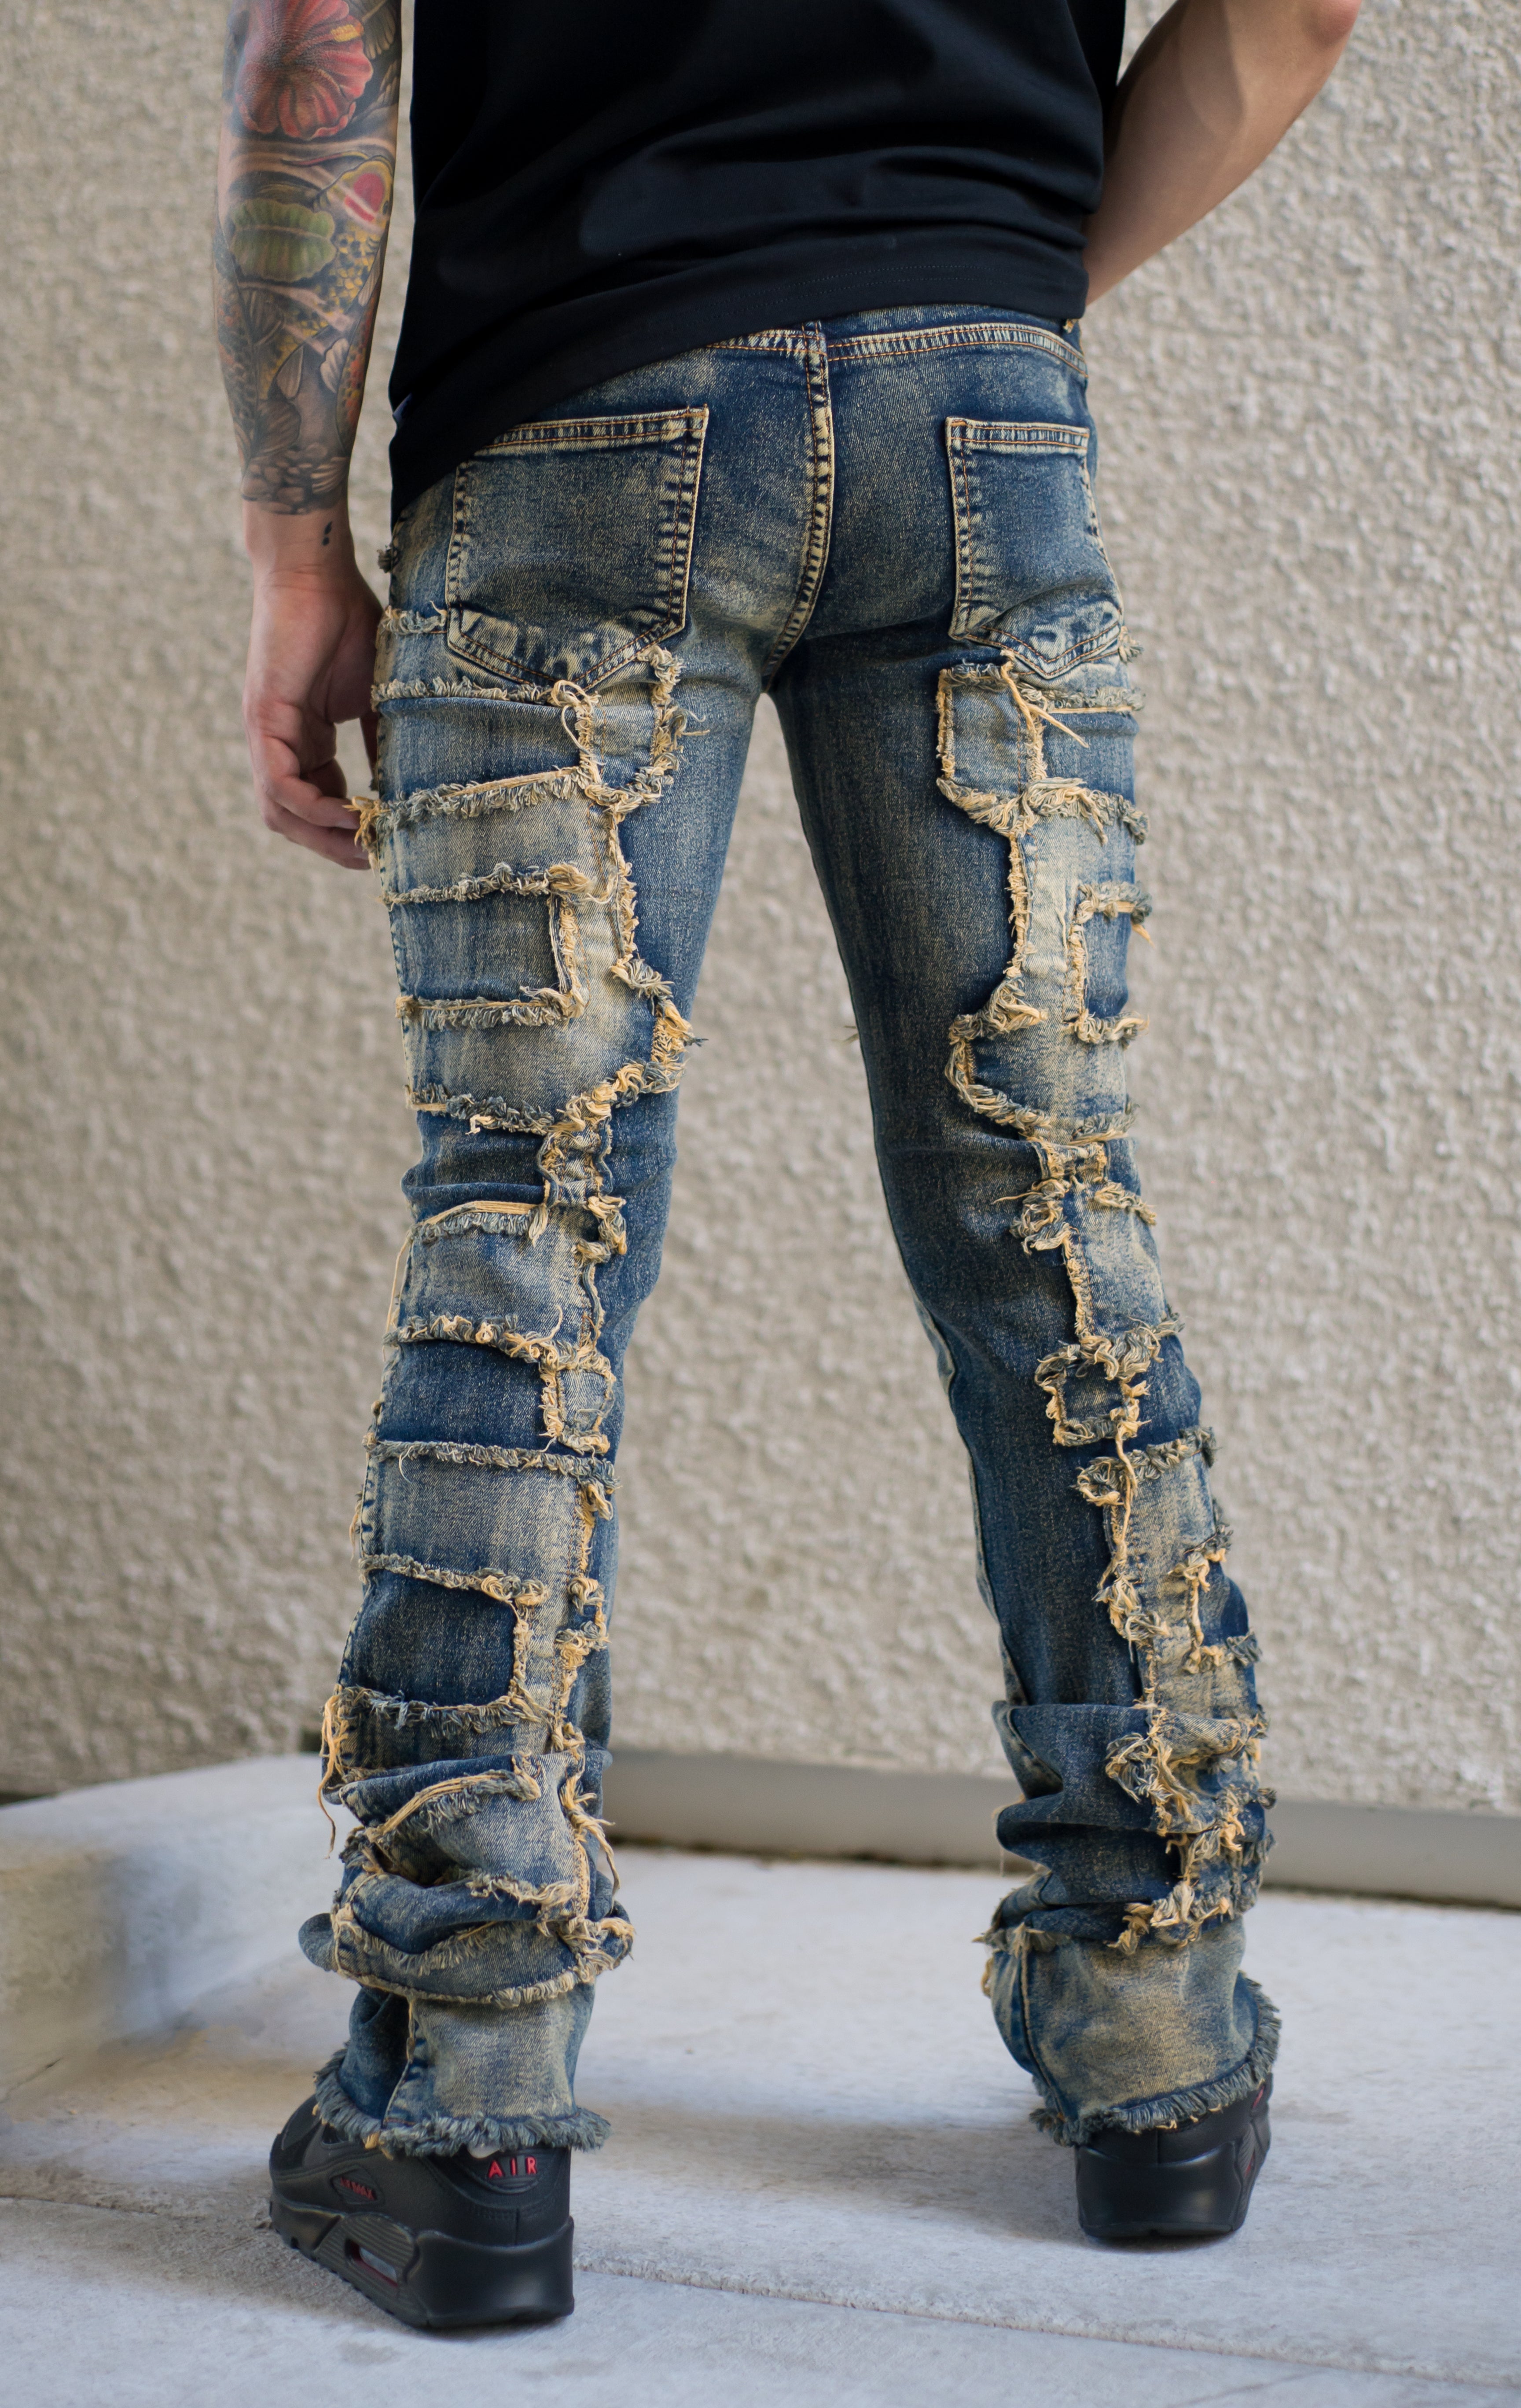 Trashed stacked jeans